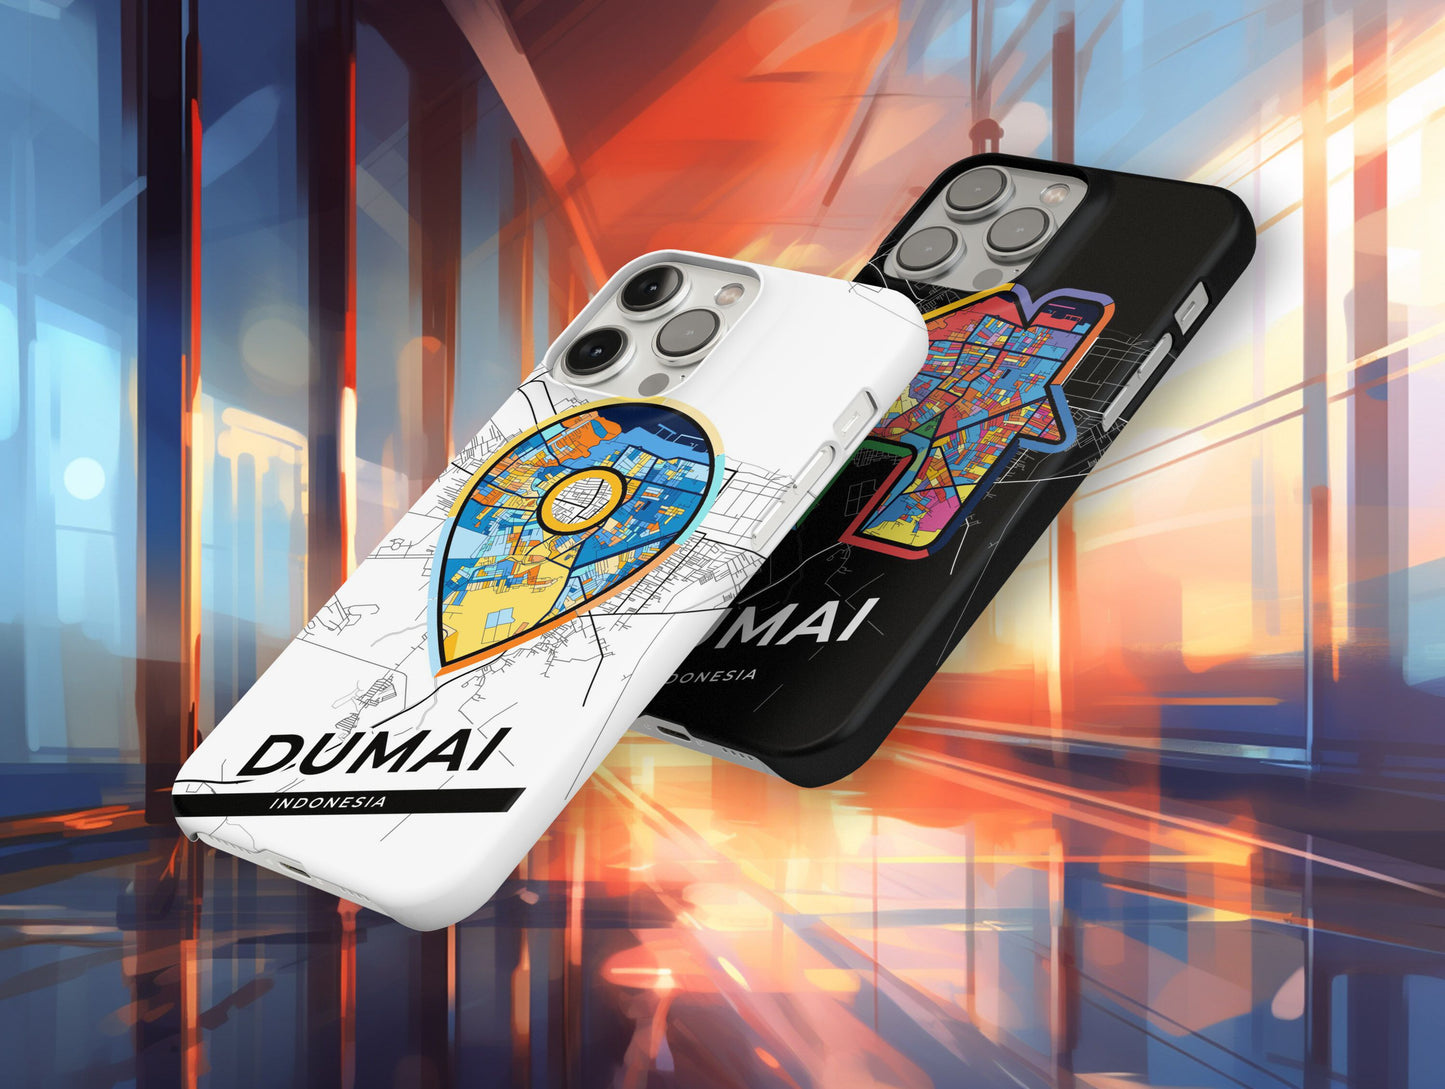 Dumai Indonesia slim phone case with colorful icon. Birthday, wedding or housewarming gift. Couple match cases.